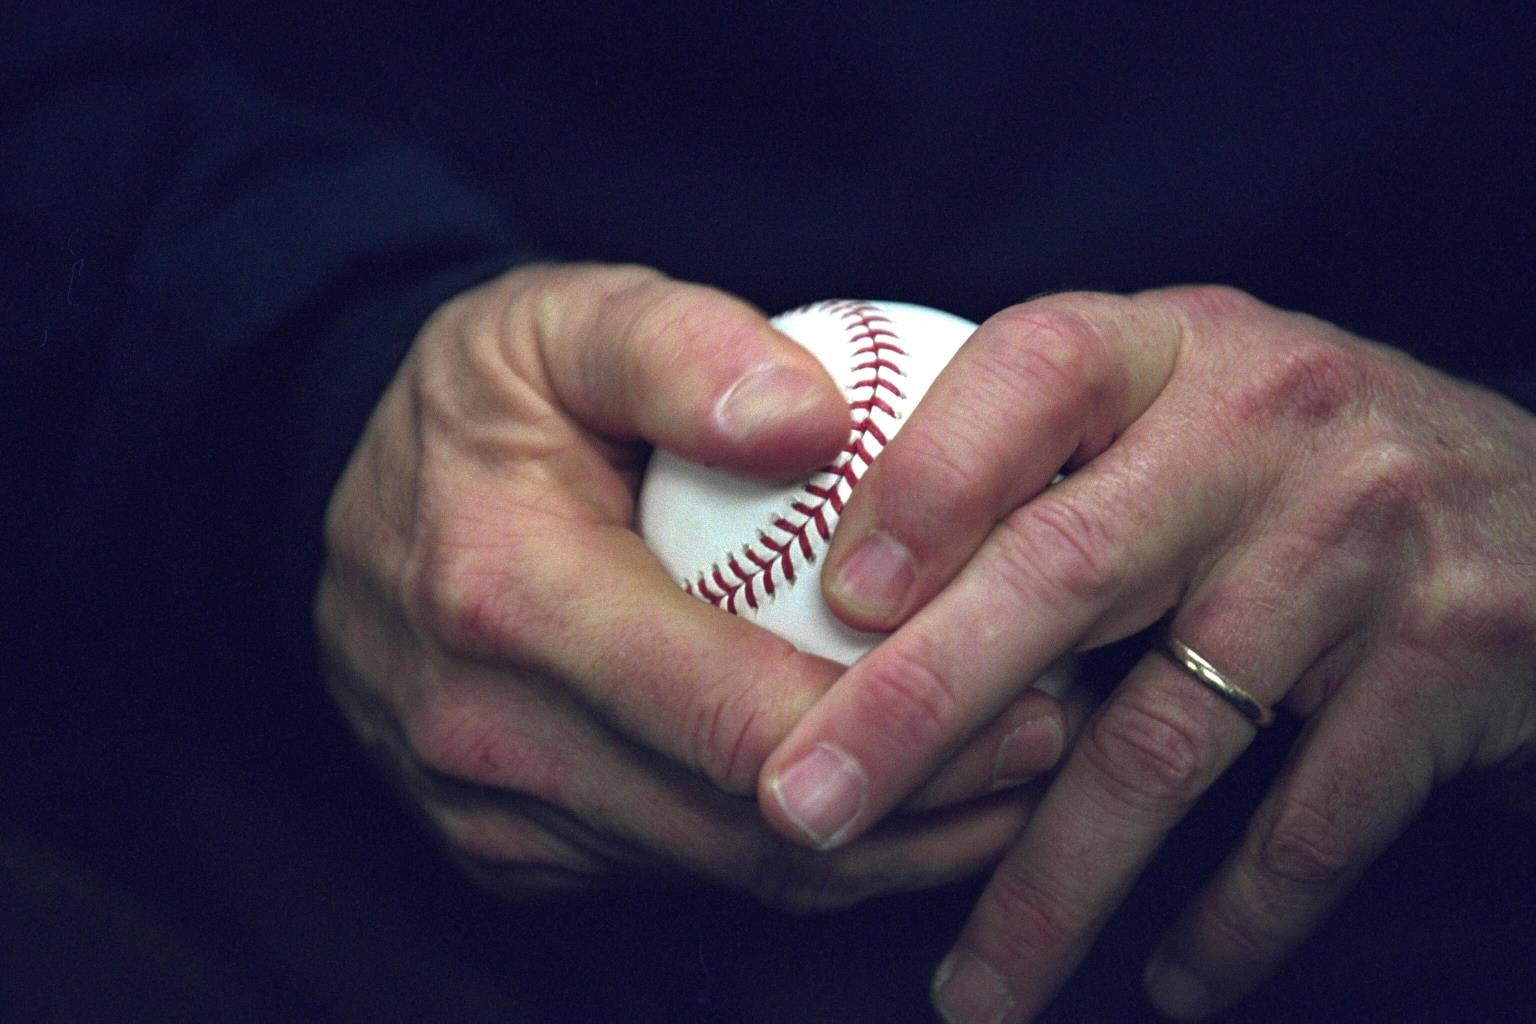 President George W. Bush holds a baseball, October 30, 2001, as he approaches the playing field at Yankee Stadium to throw out the ceremonial first pitch for Game Three of the World Series in New York City. (P9151-15)